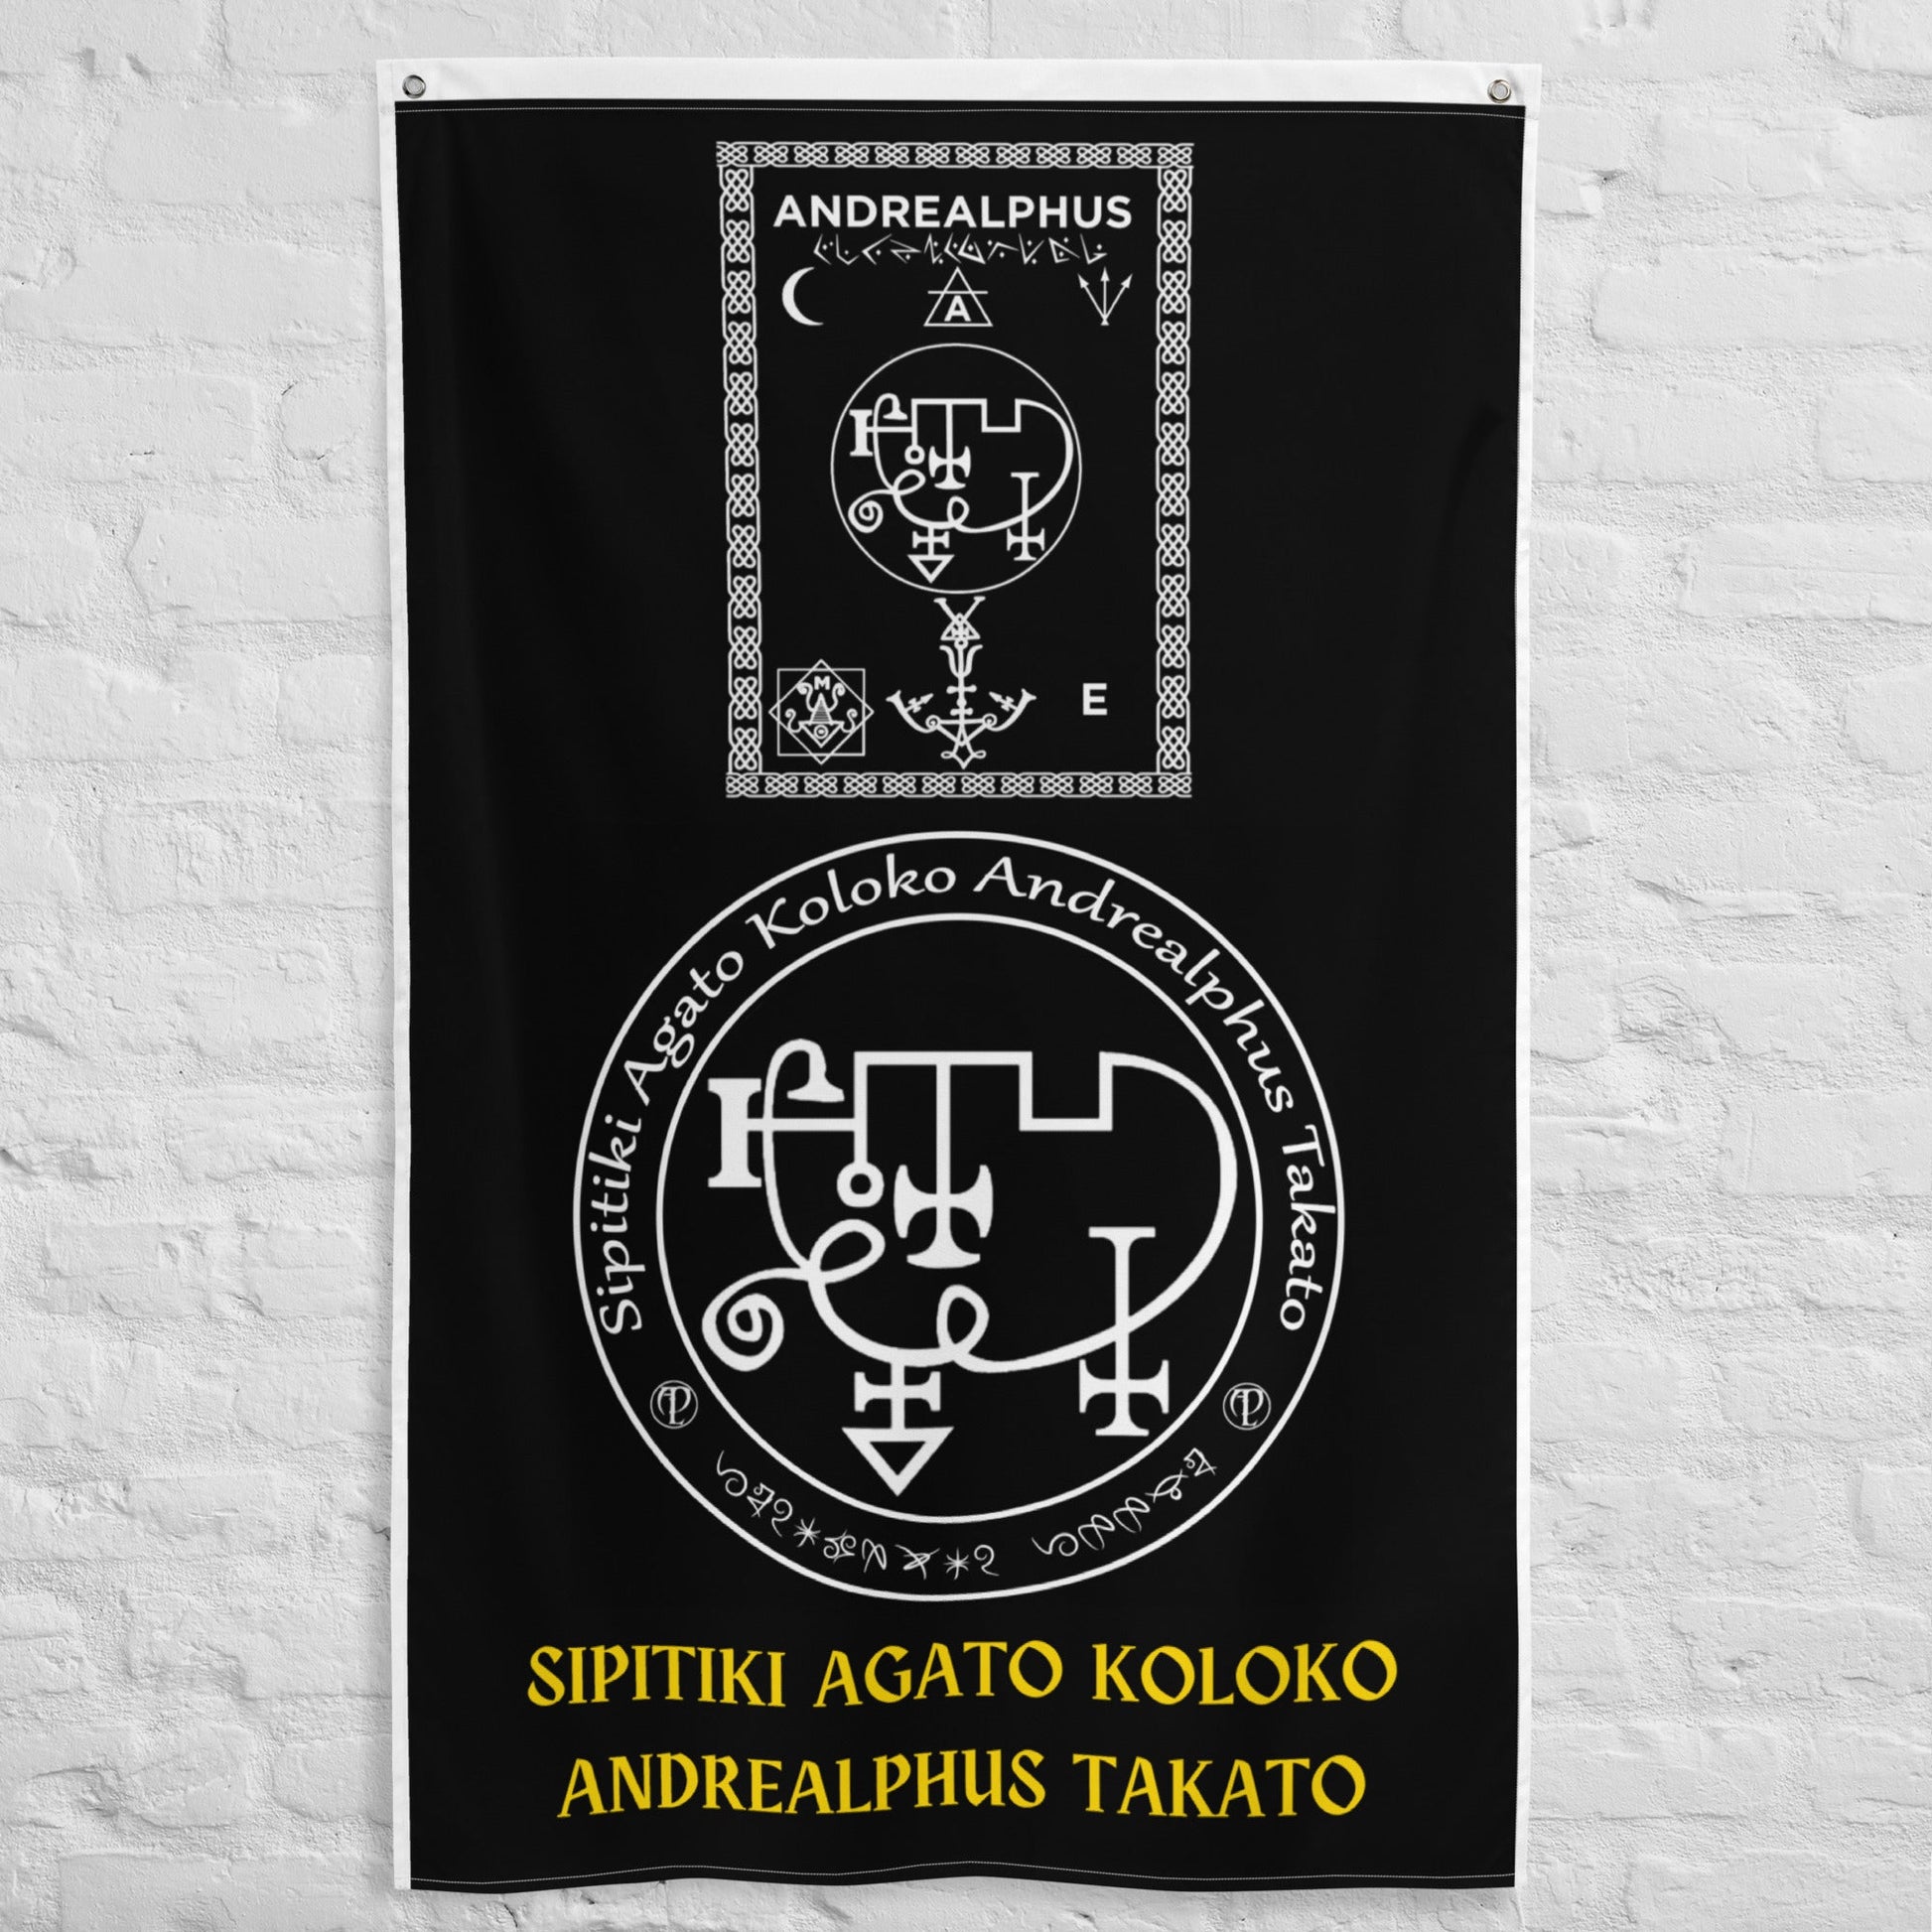 Attunement-Invocation-Flag-of-Spirit-Andrealphus-To-make-your-attunements-and-invocations-easy-and-fast